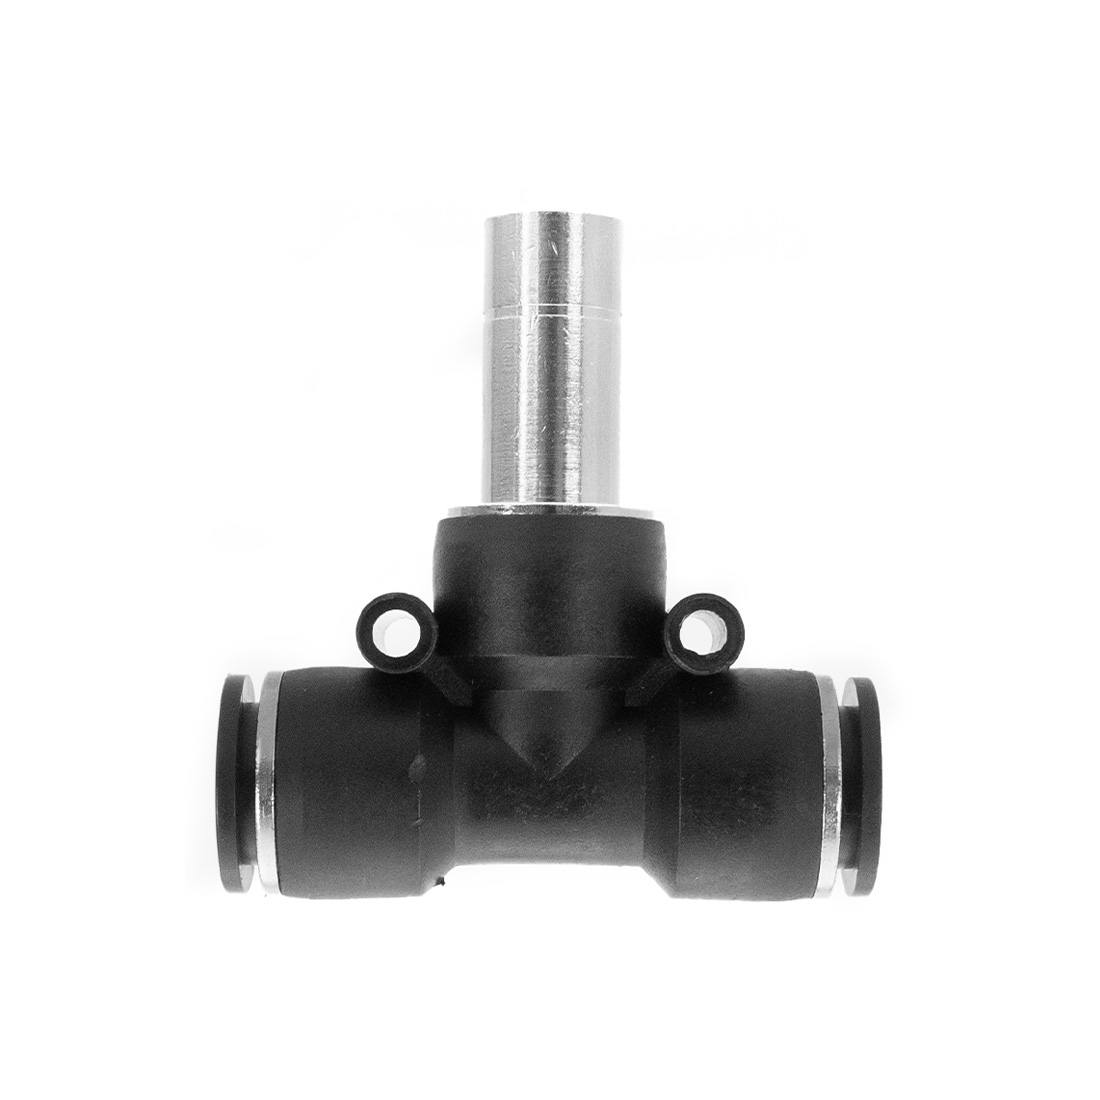 XERO Push-to-Fit T-Fitting with Stem - 1/2 Inch Stem View